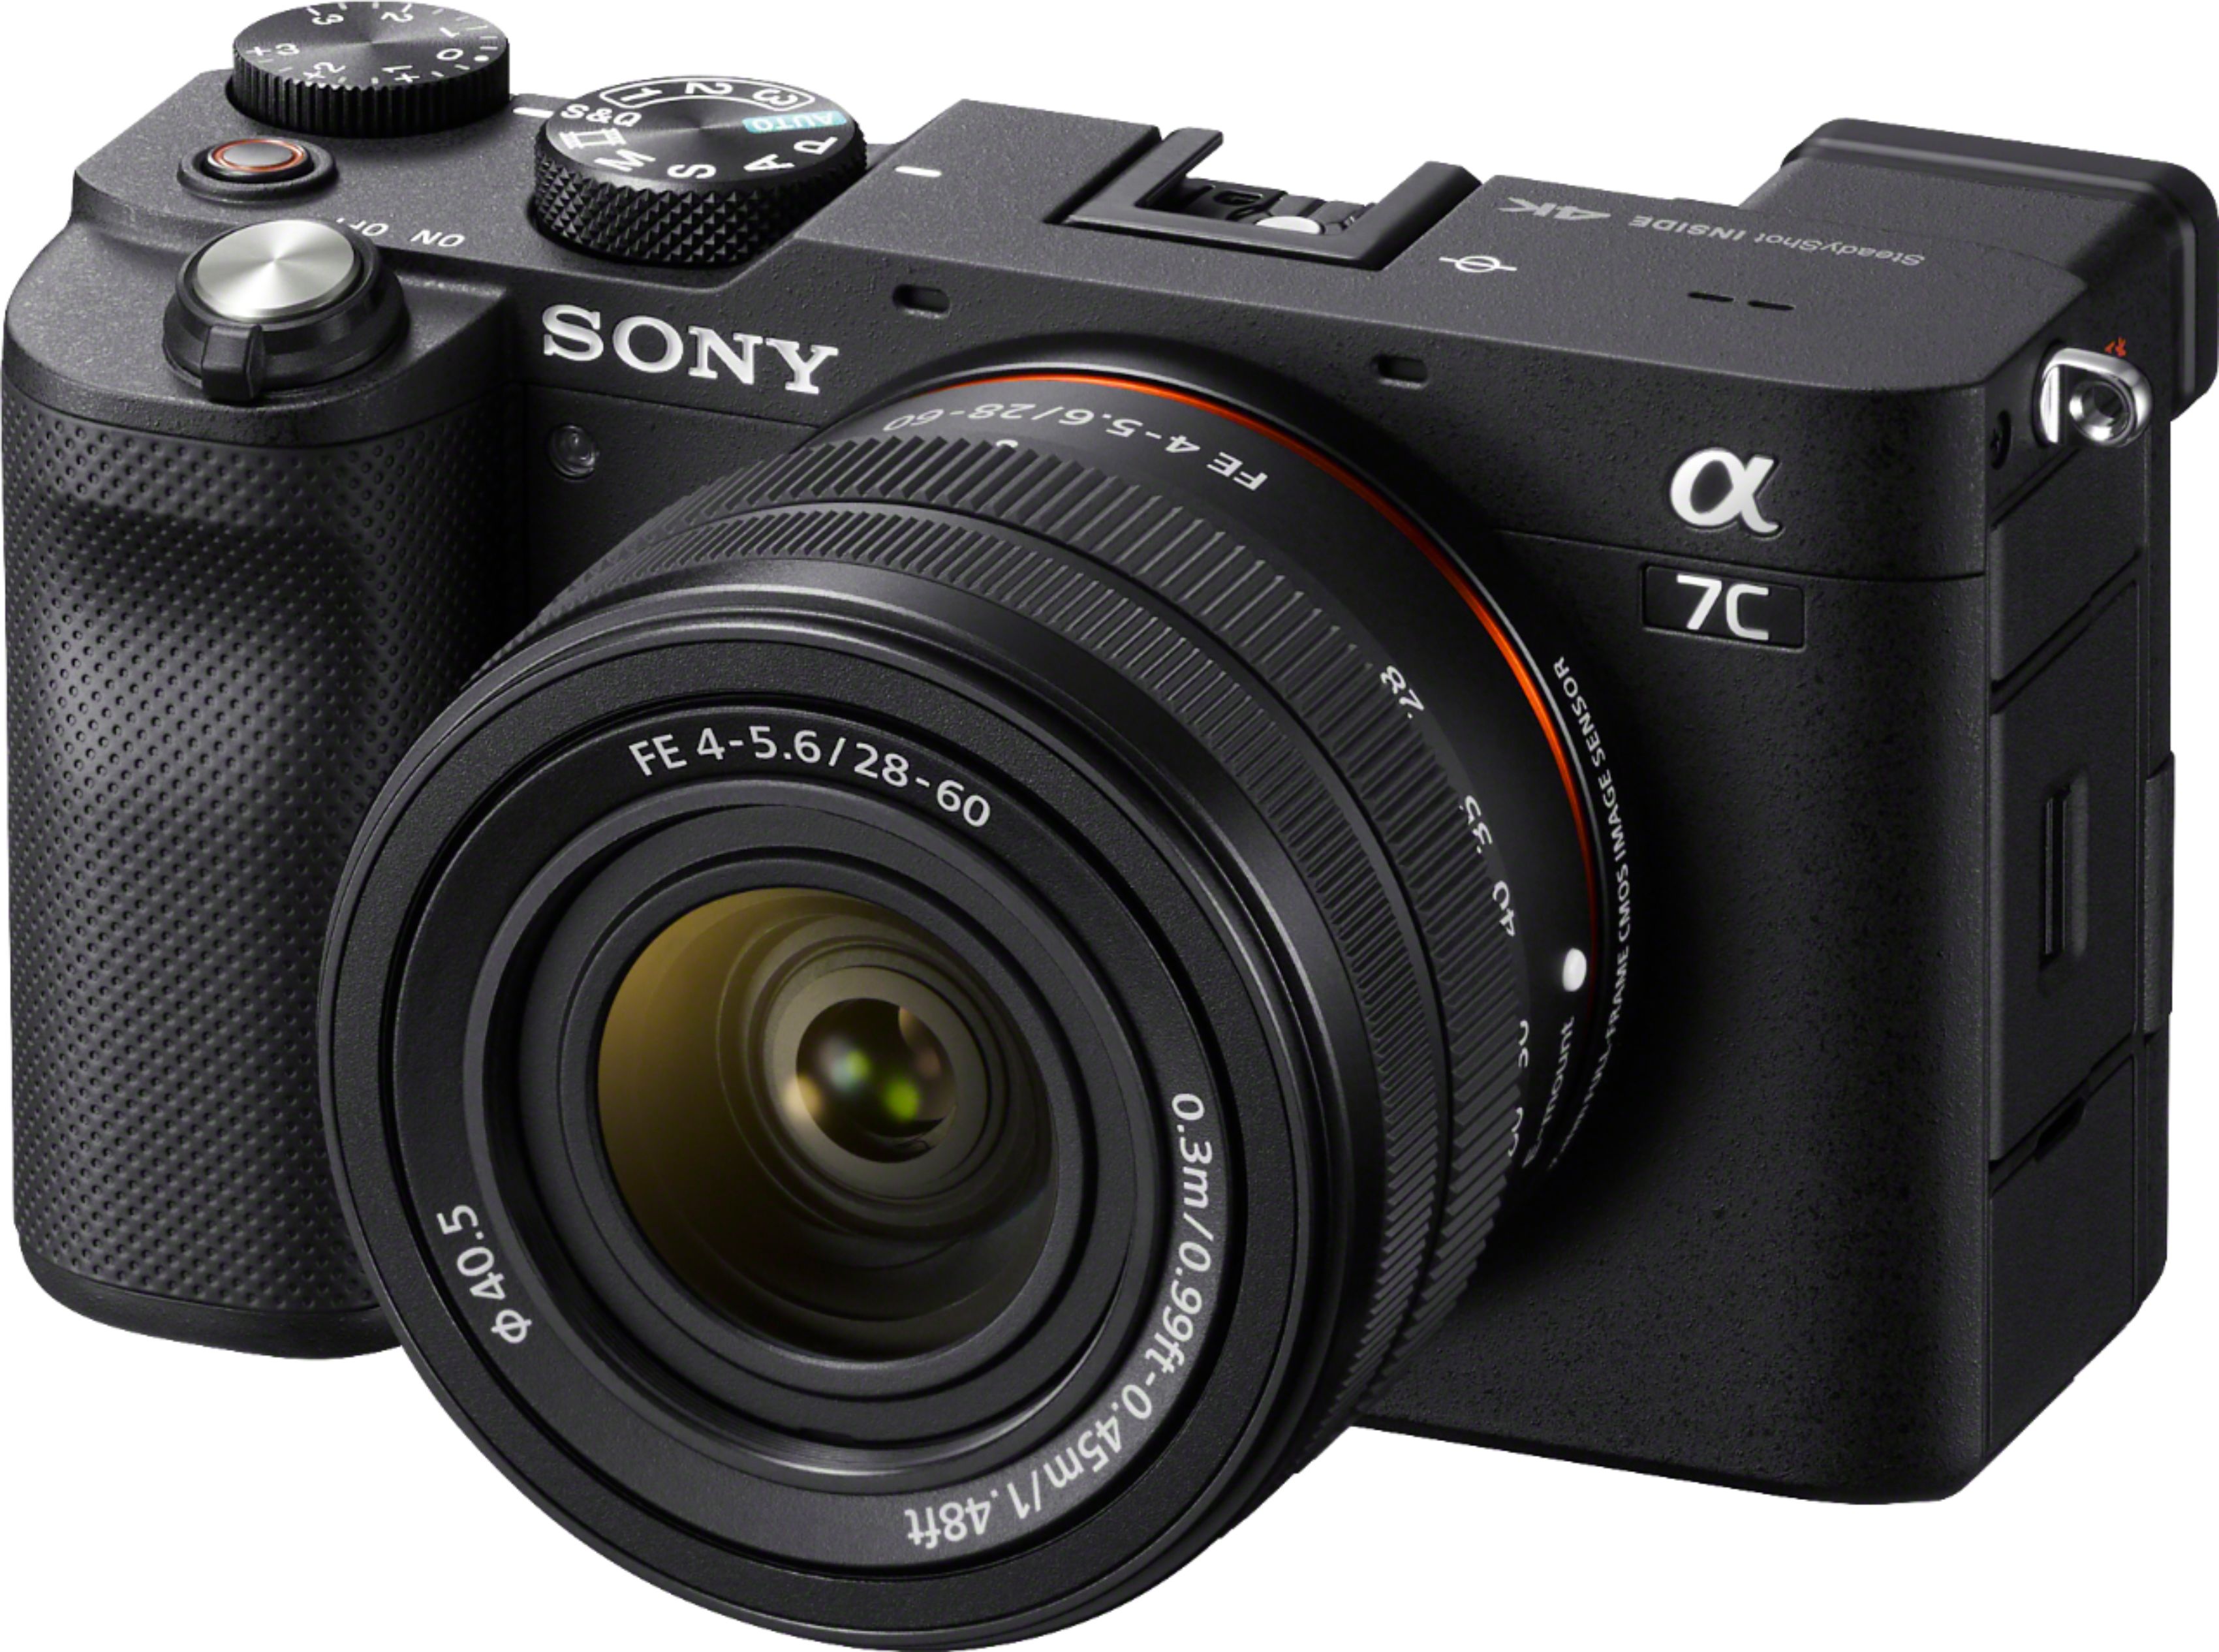 Angle View: Sony - Alpha 7C Full-frame Compact Mirrorless Camera with FE 28-60mm F4-5.6 lens - Black